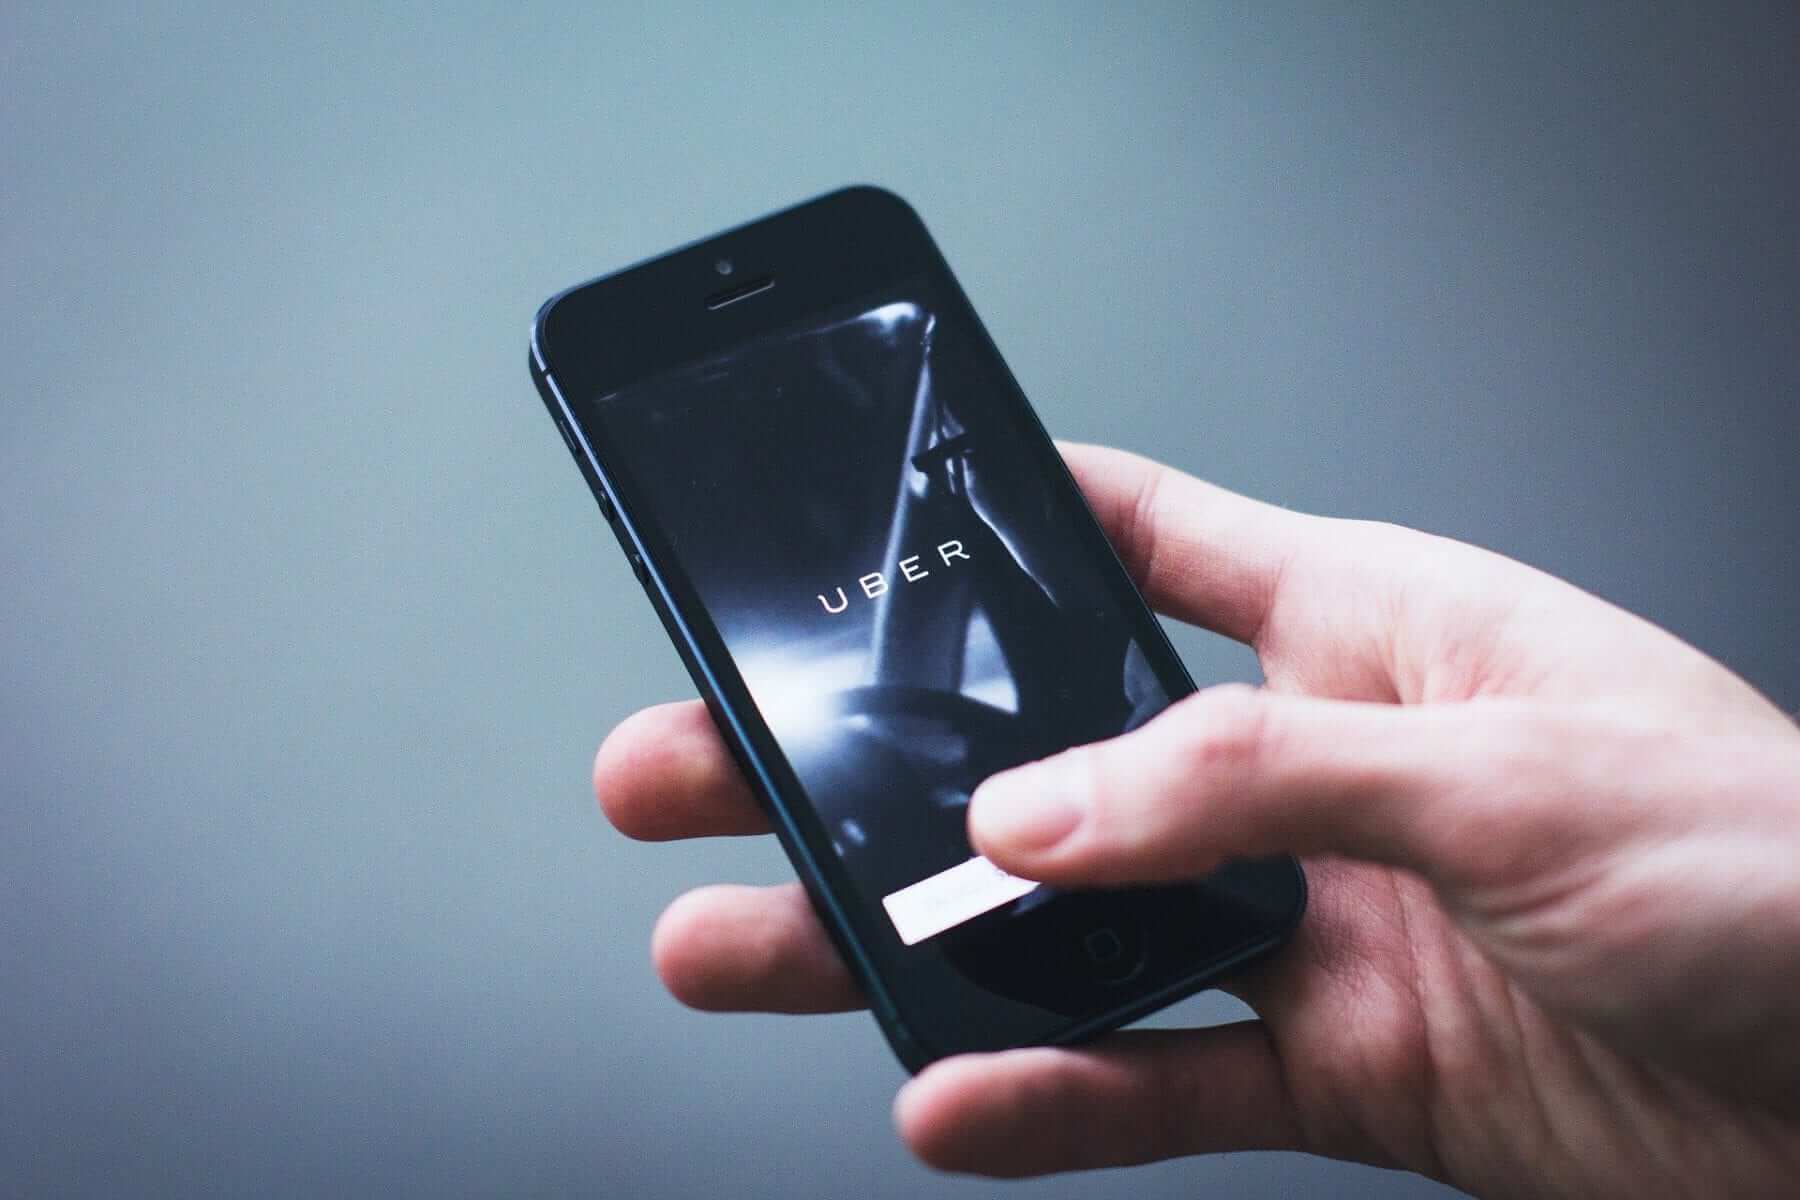 A smartphone with the Uber app open